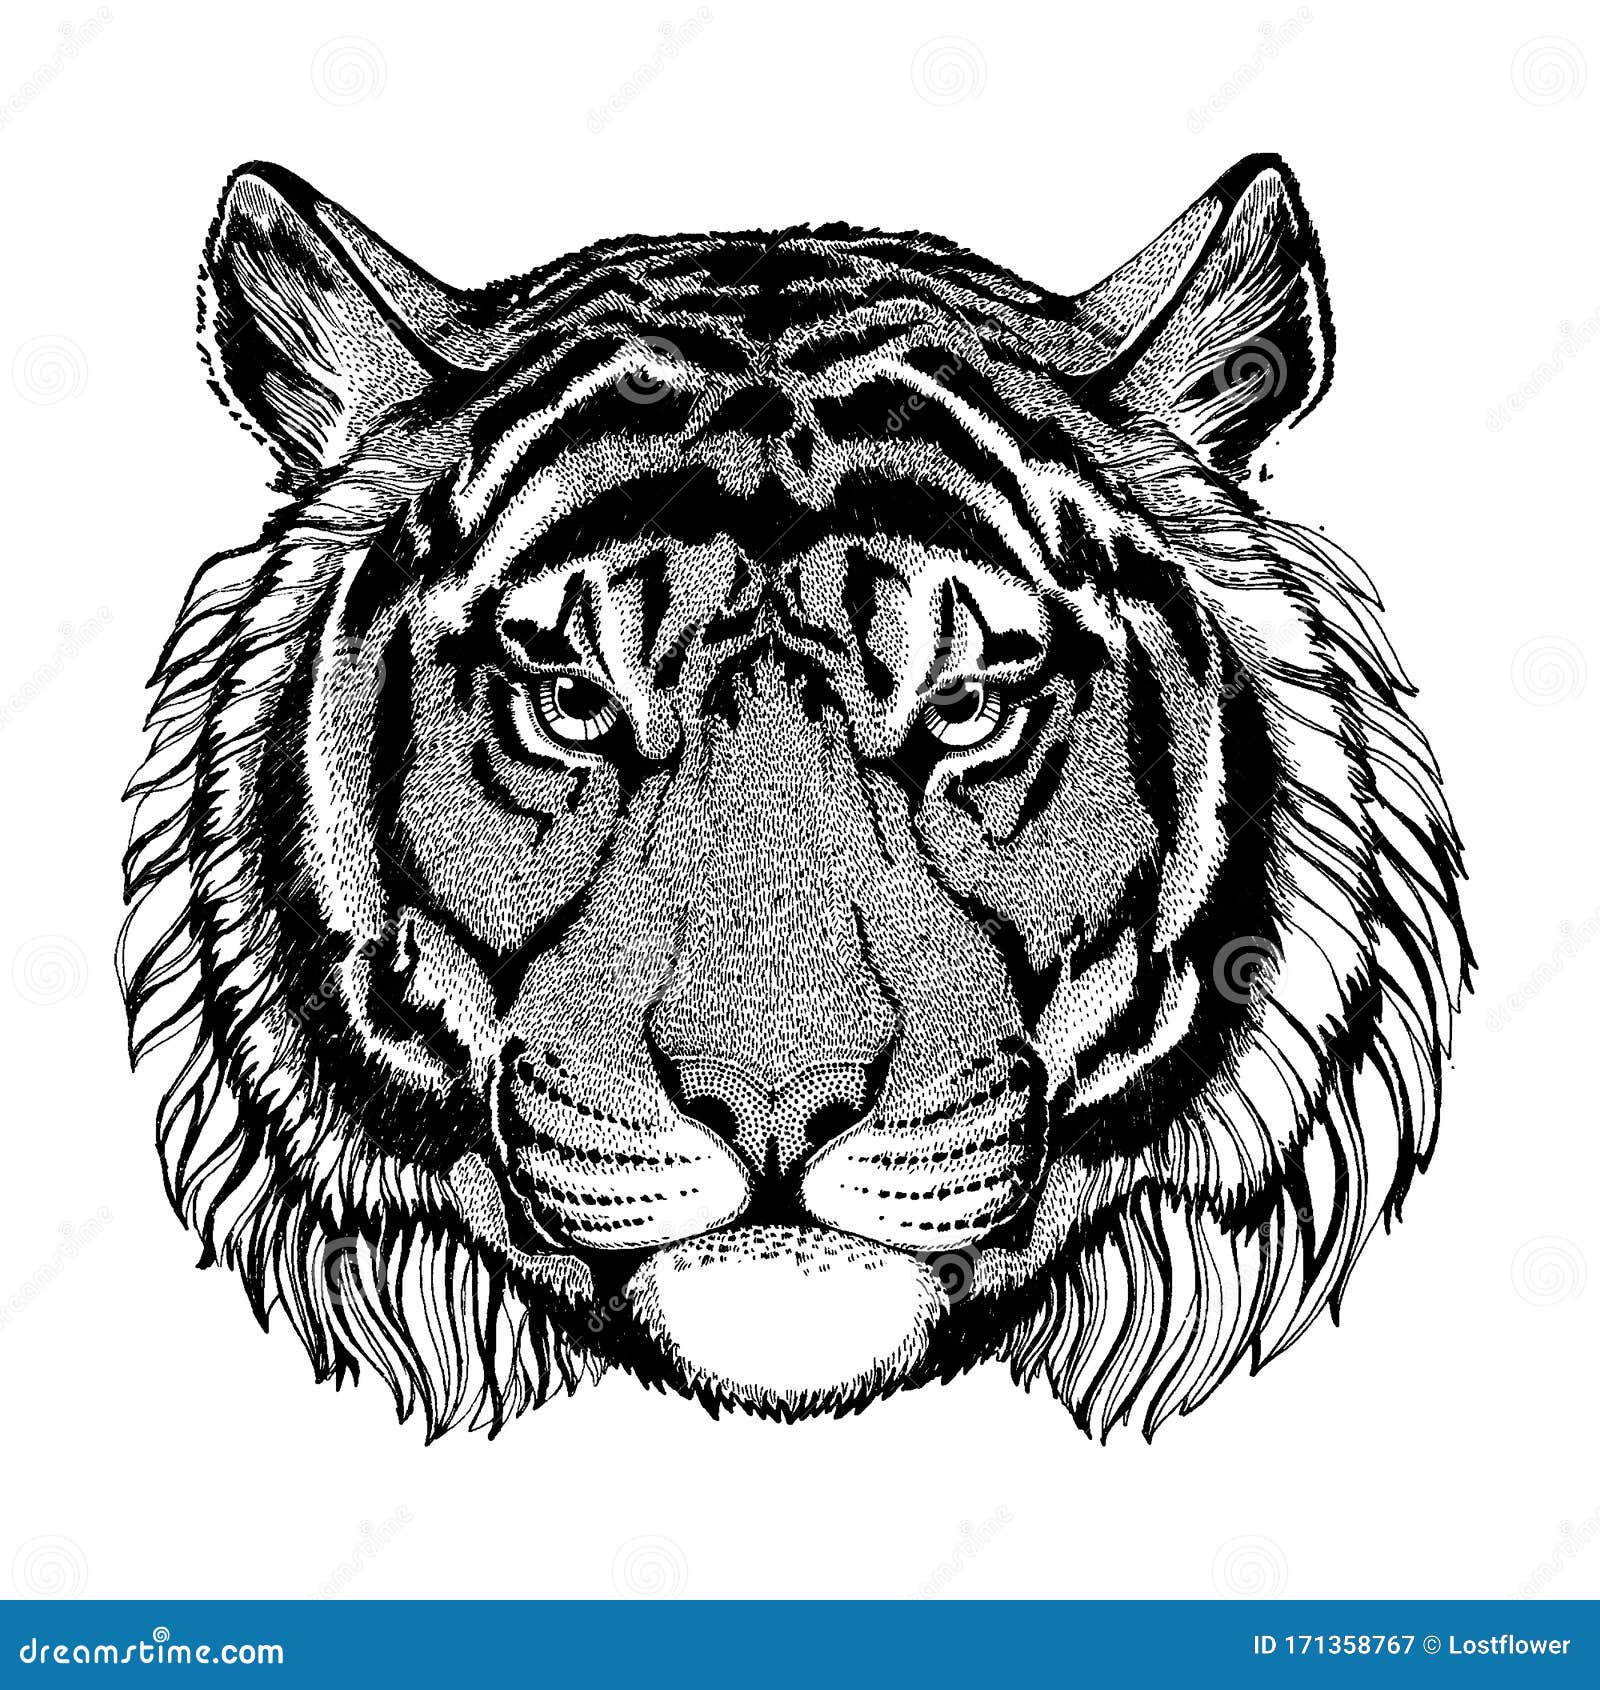 Tiger. Wild Animal for Tattoo, Nursery Poster, Children Tee, Clothing ...